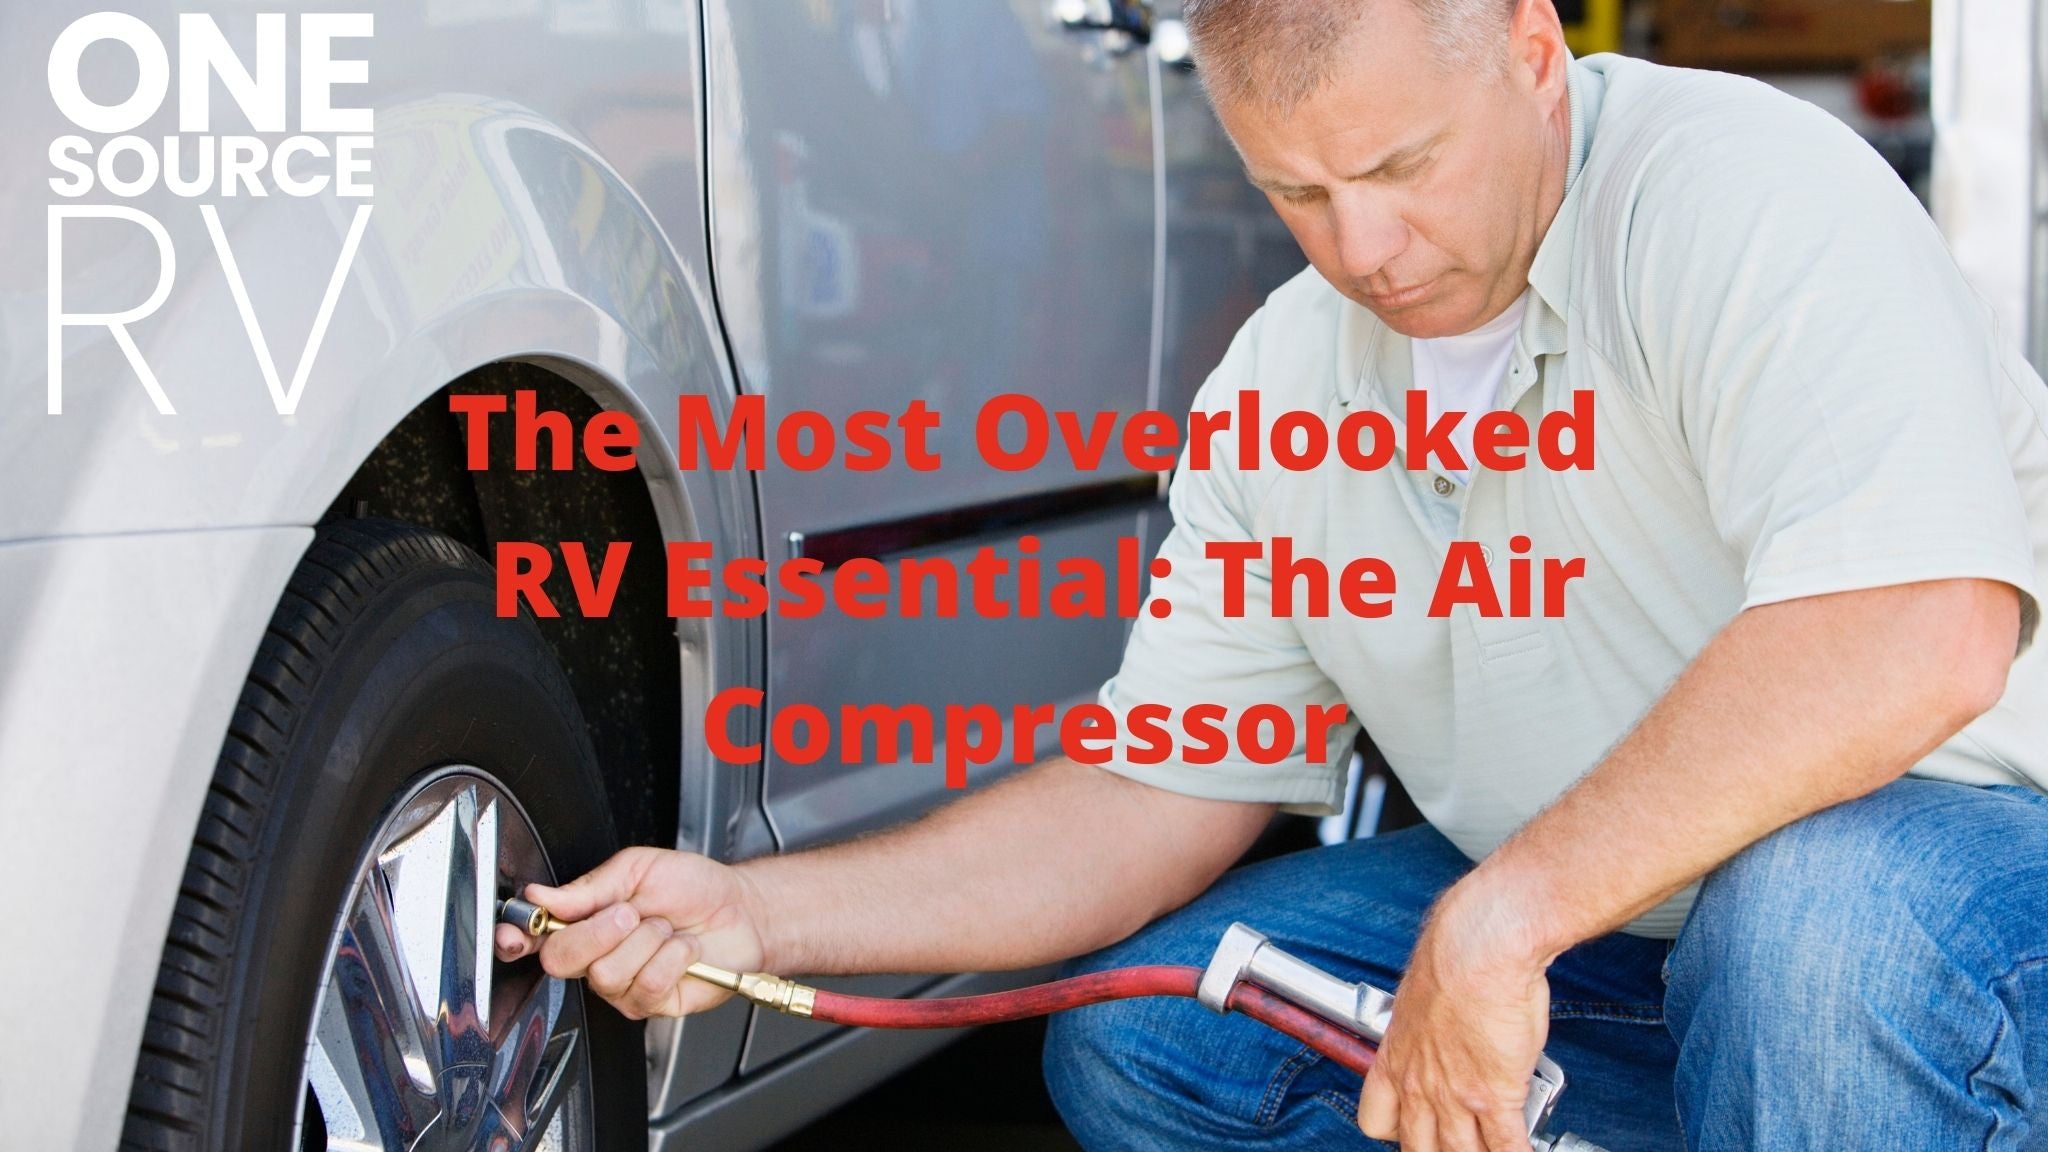 The Most Overlooked RV Essential: The Air Compressor